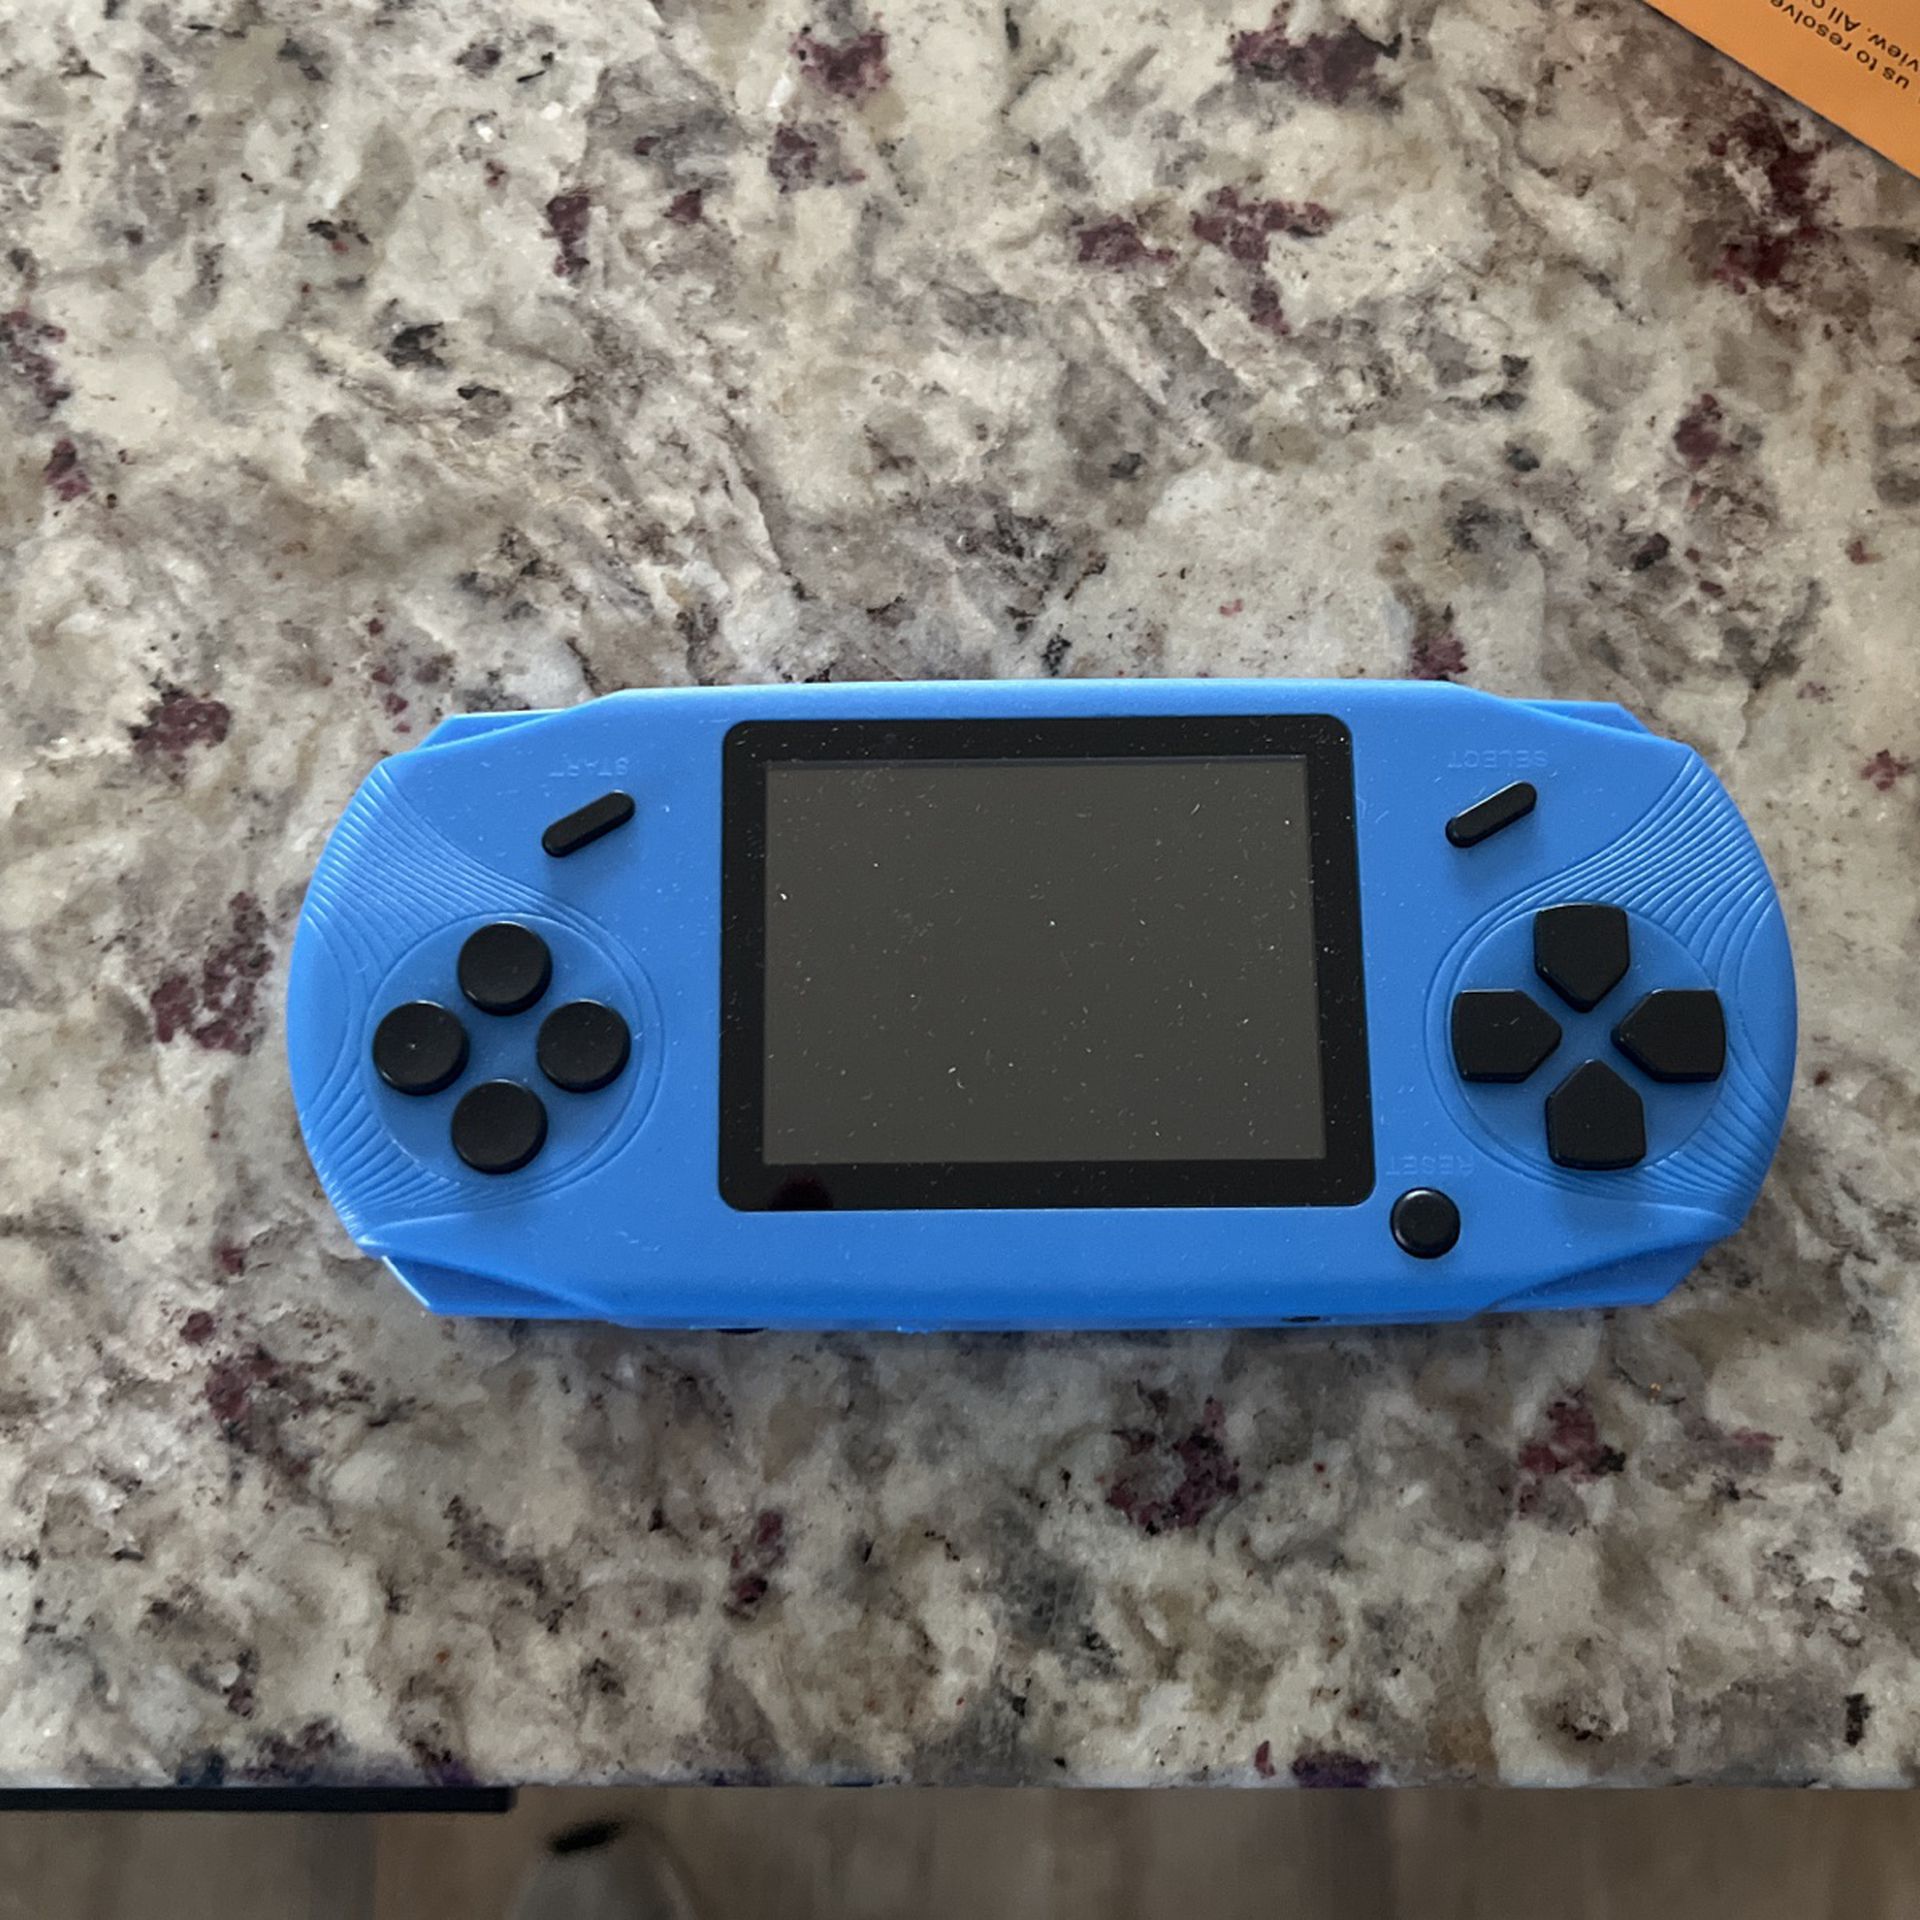 Taddtoy Handheld Game Console